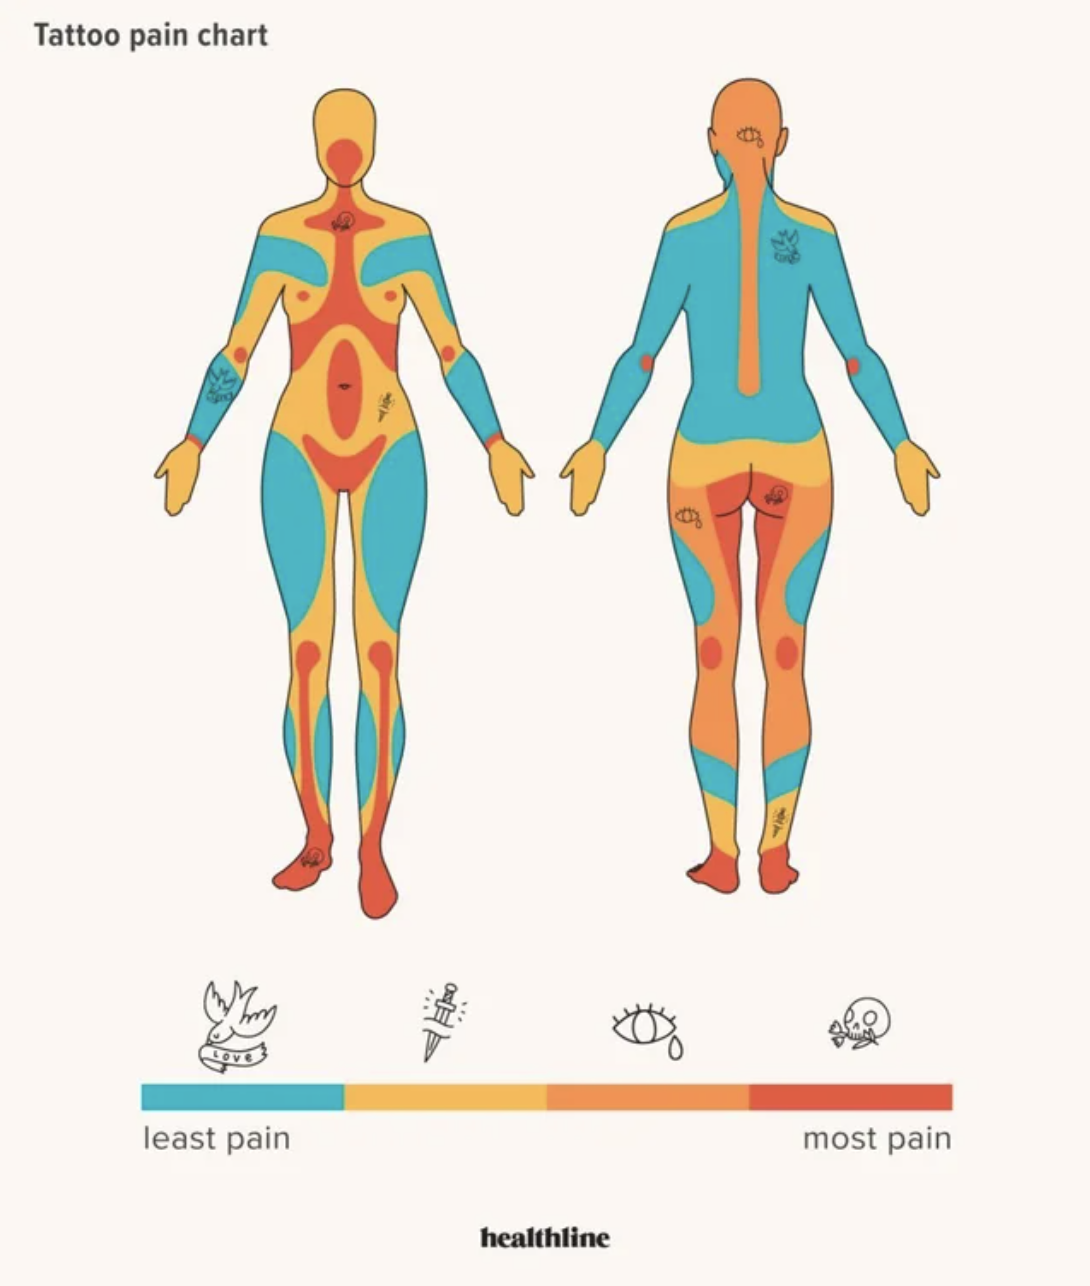 A chart showing where on the body tattoos are the most and least painful